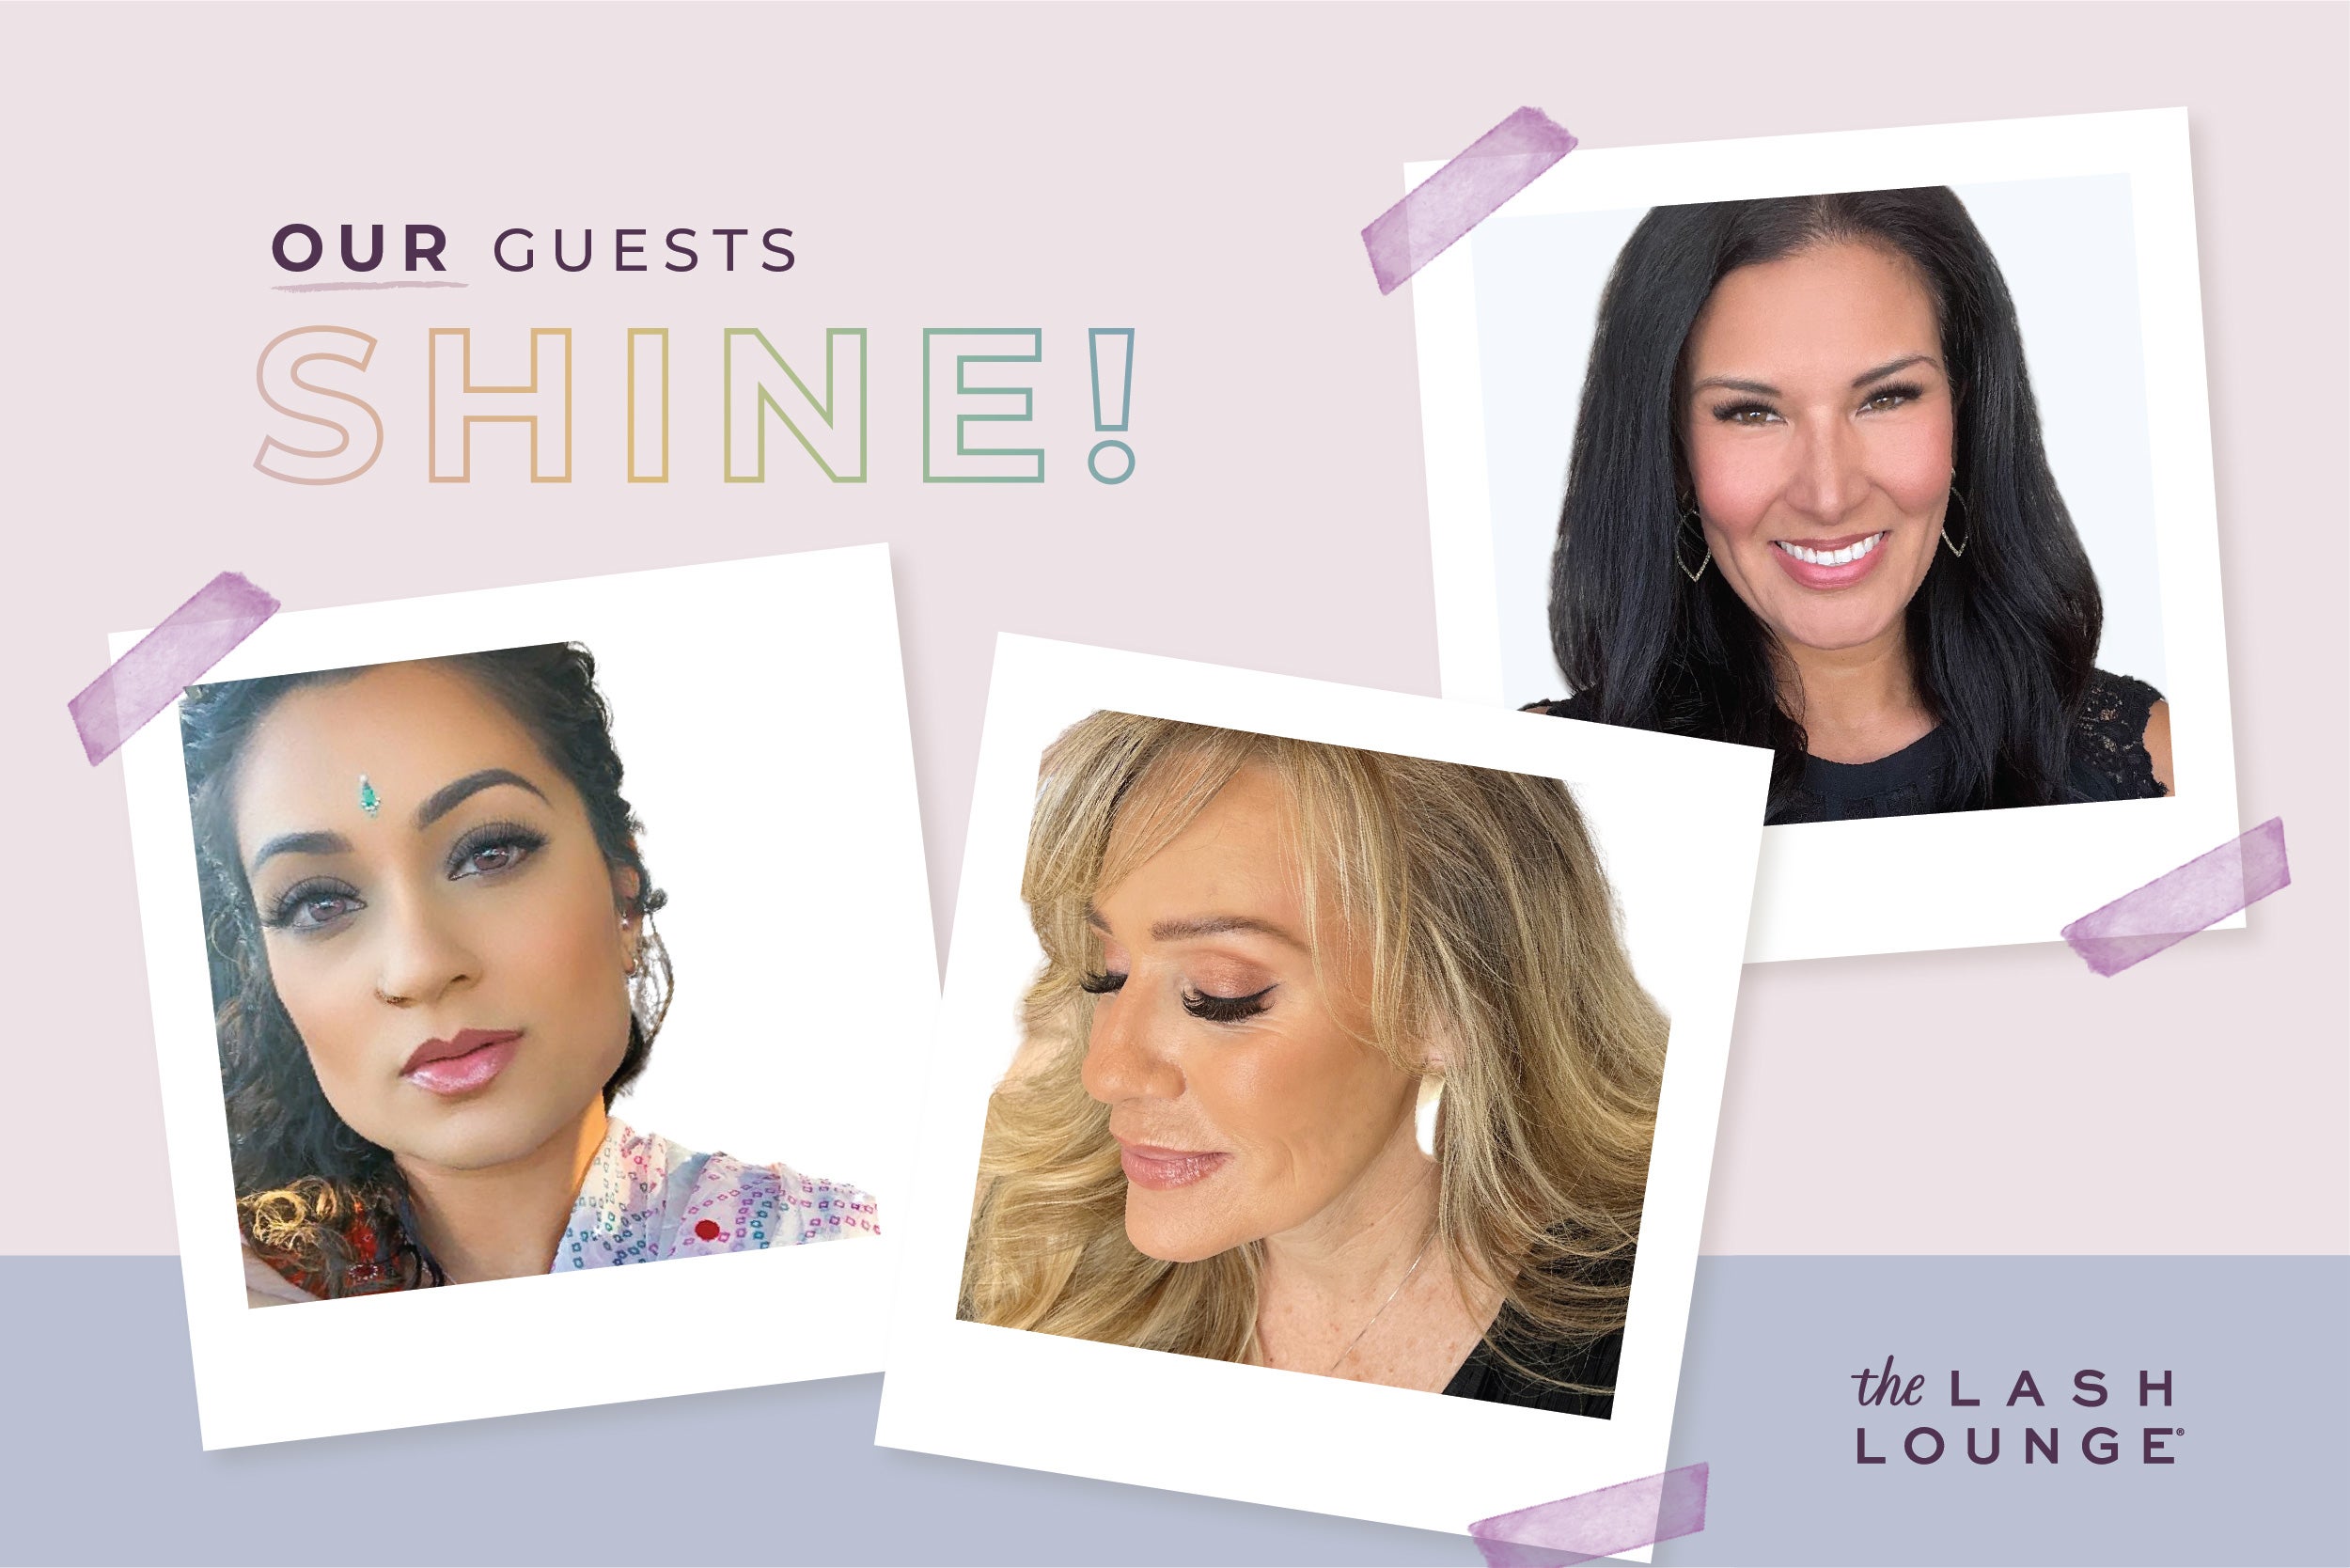 a graphic design template featuring the images of 3 Lash Lounge guests with lash extensions and text that reads "Our Guests SHINE!"